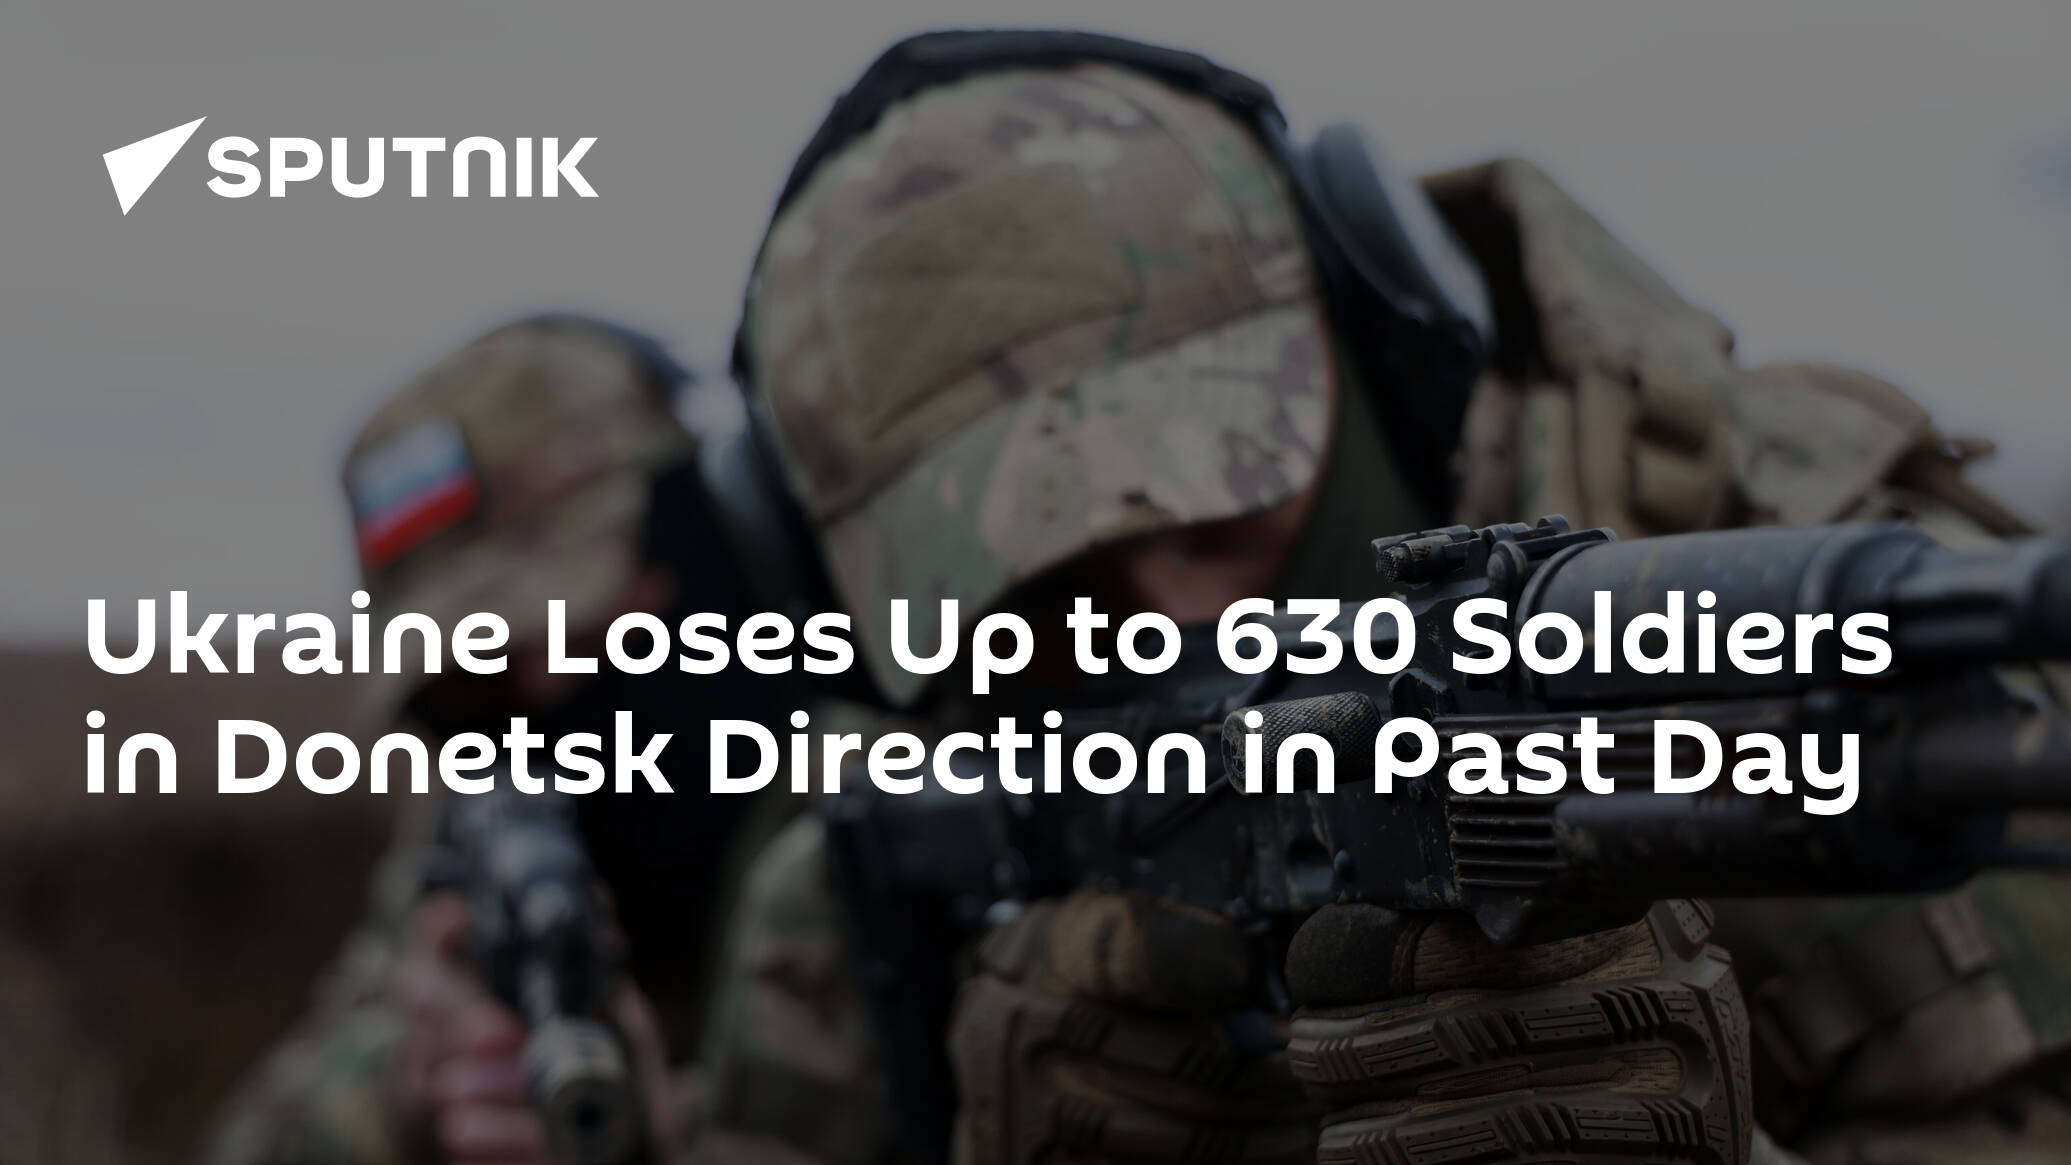 Ukraine Loses Up to 630 Soldiers in Donetsk Direction in Past Day